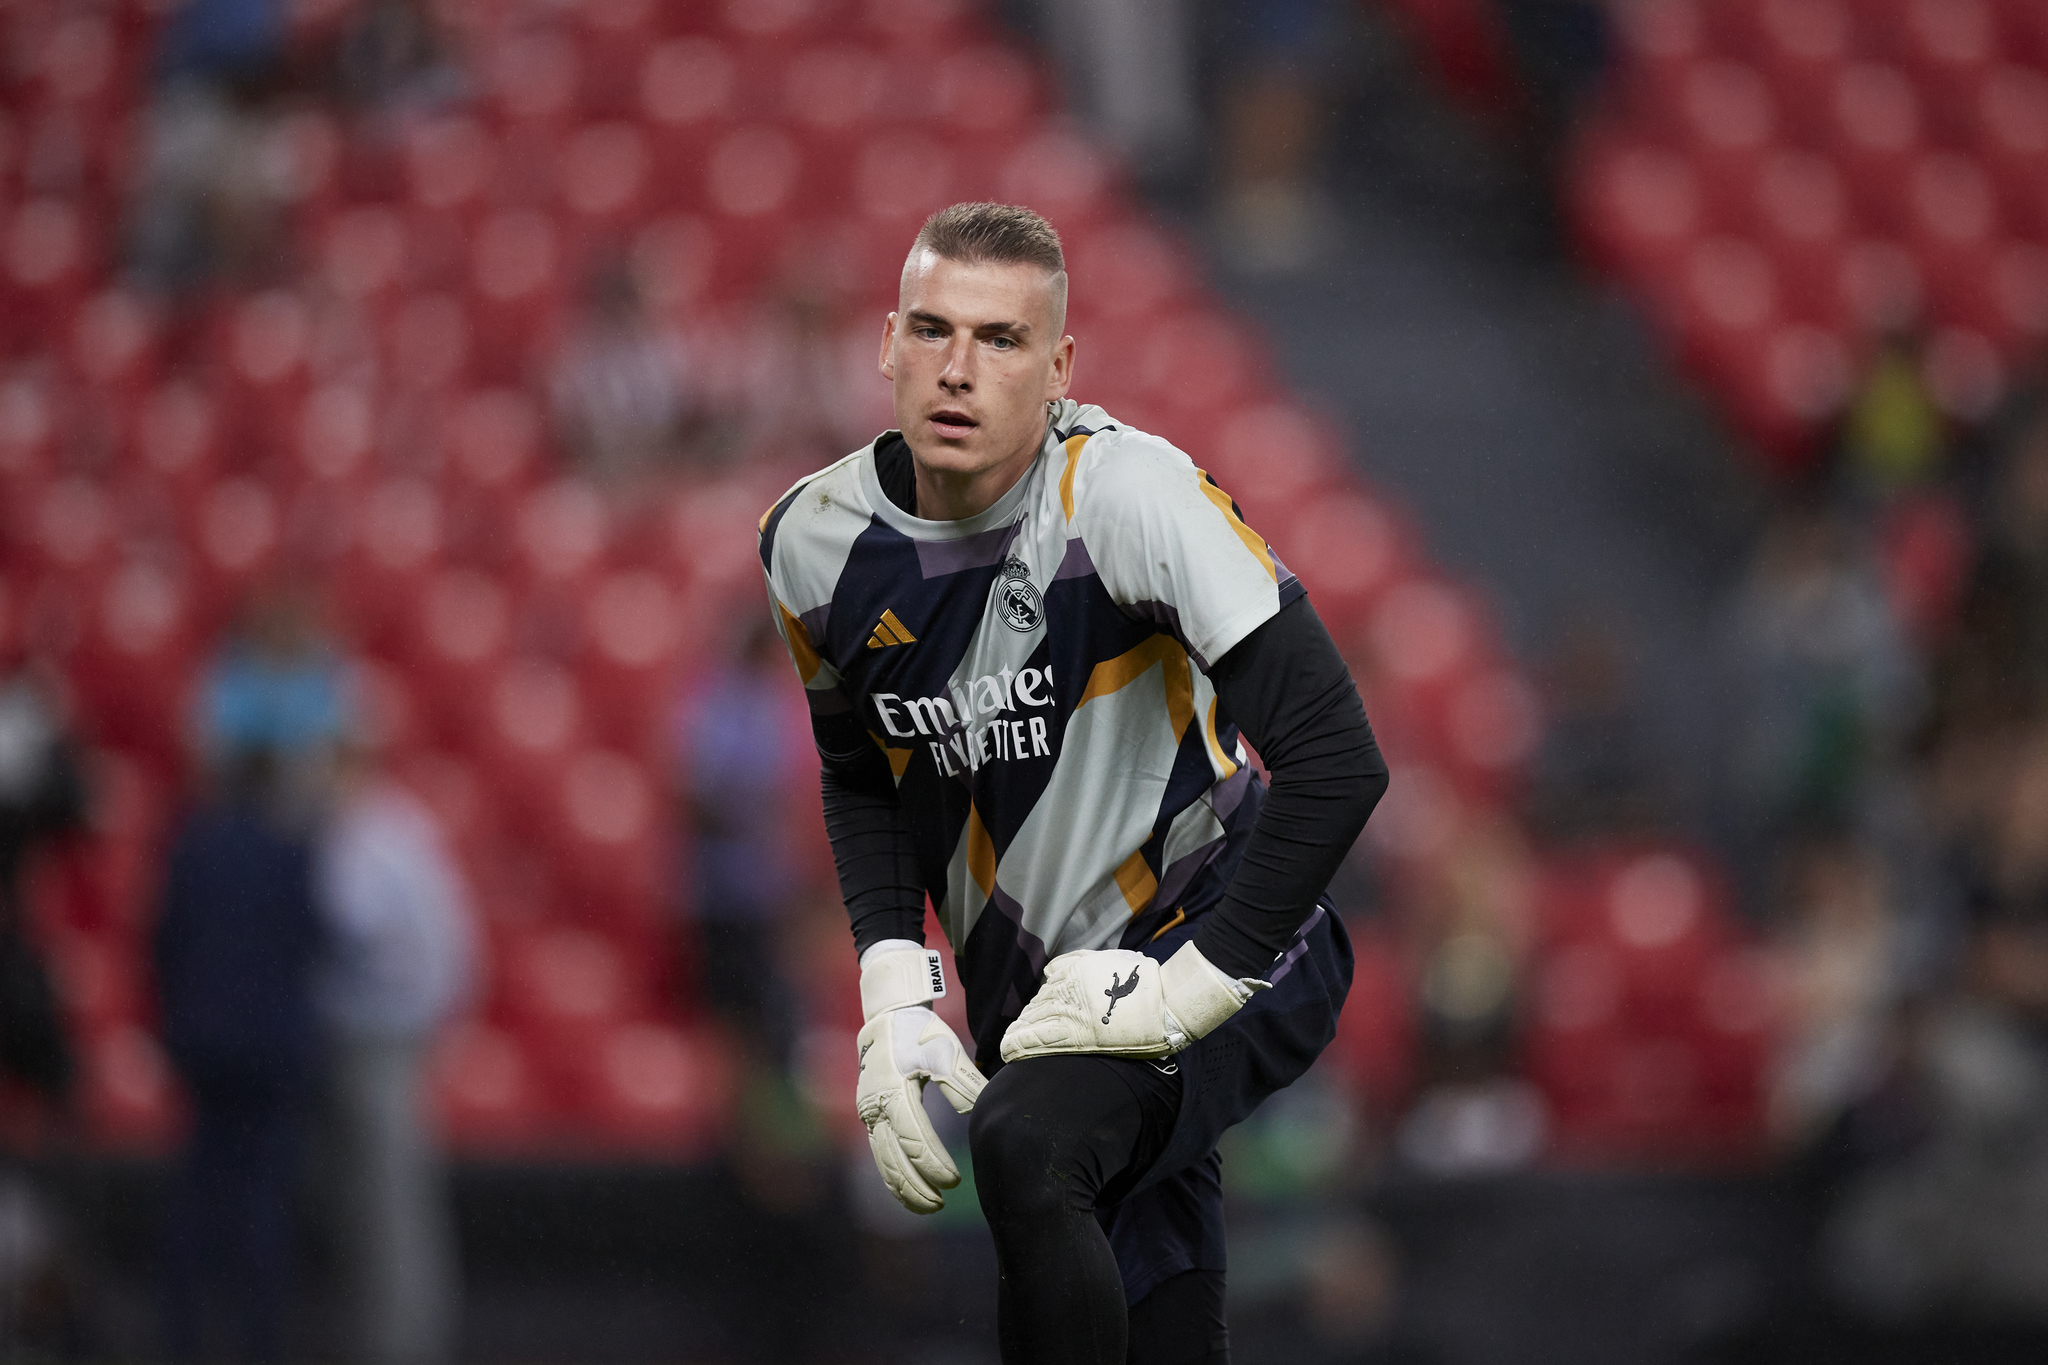 With Courtois out for the forseeable future, Andriy Lunin will start in goal against Athletic Club